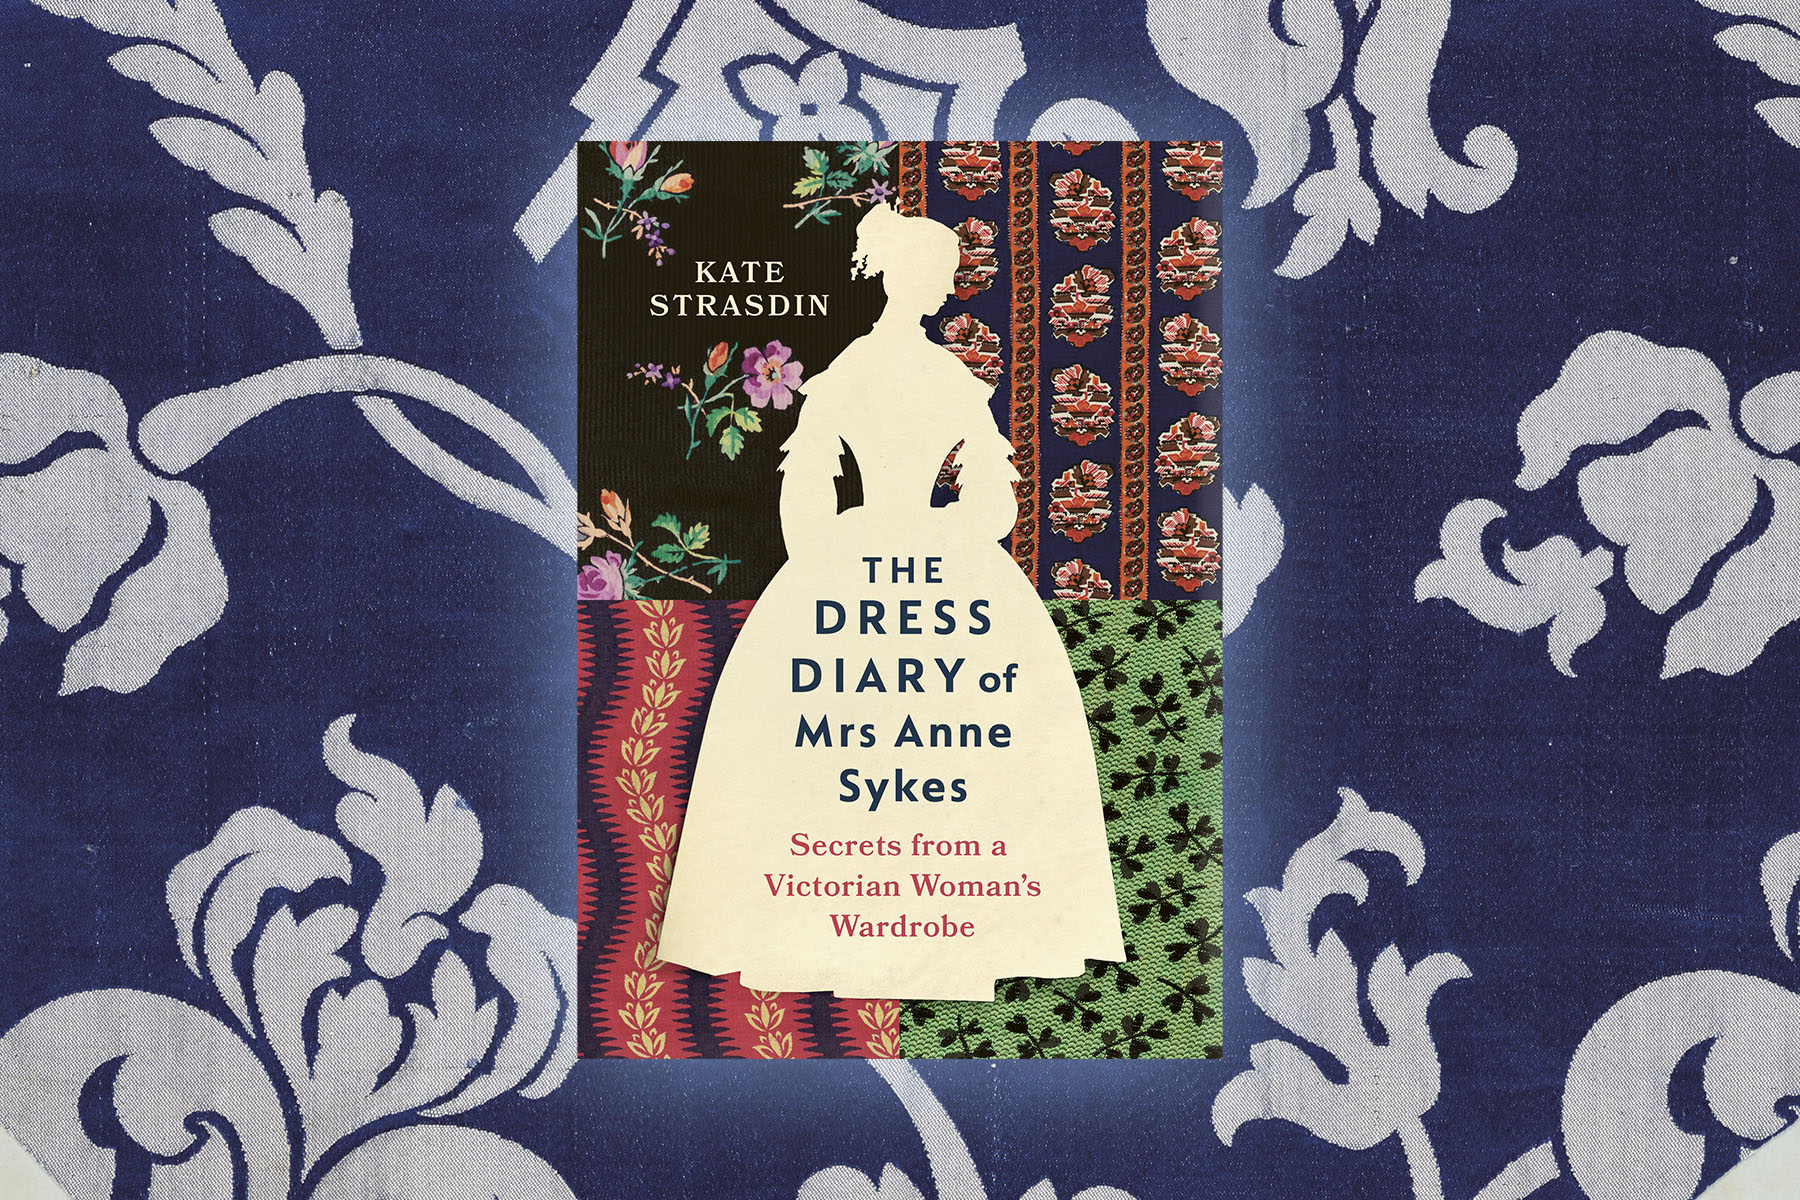 Book, The Dress Diary of Mrs Anne Sykes, against a blue and white fabric backdrop.